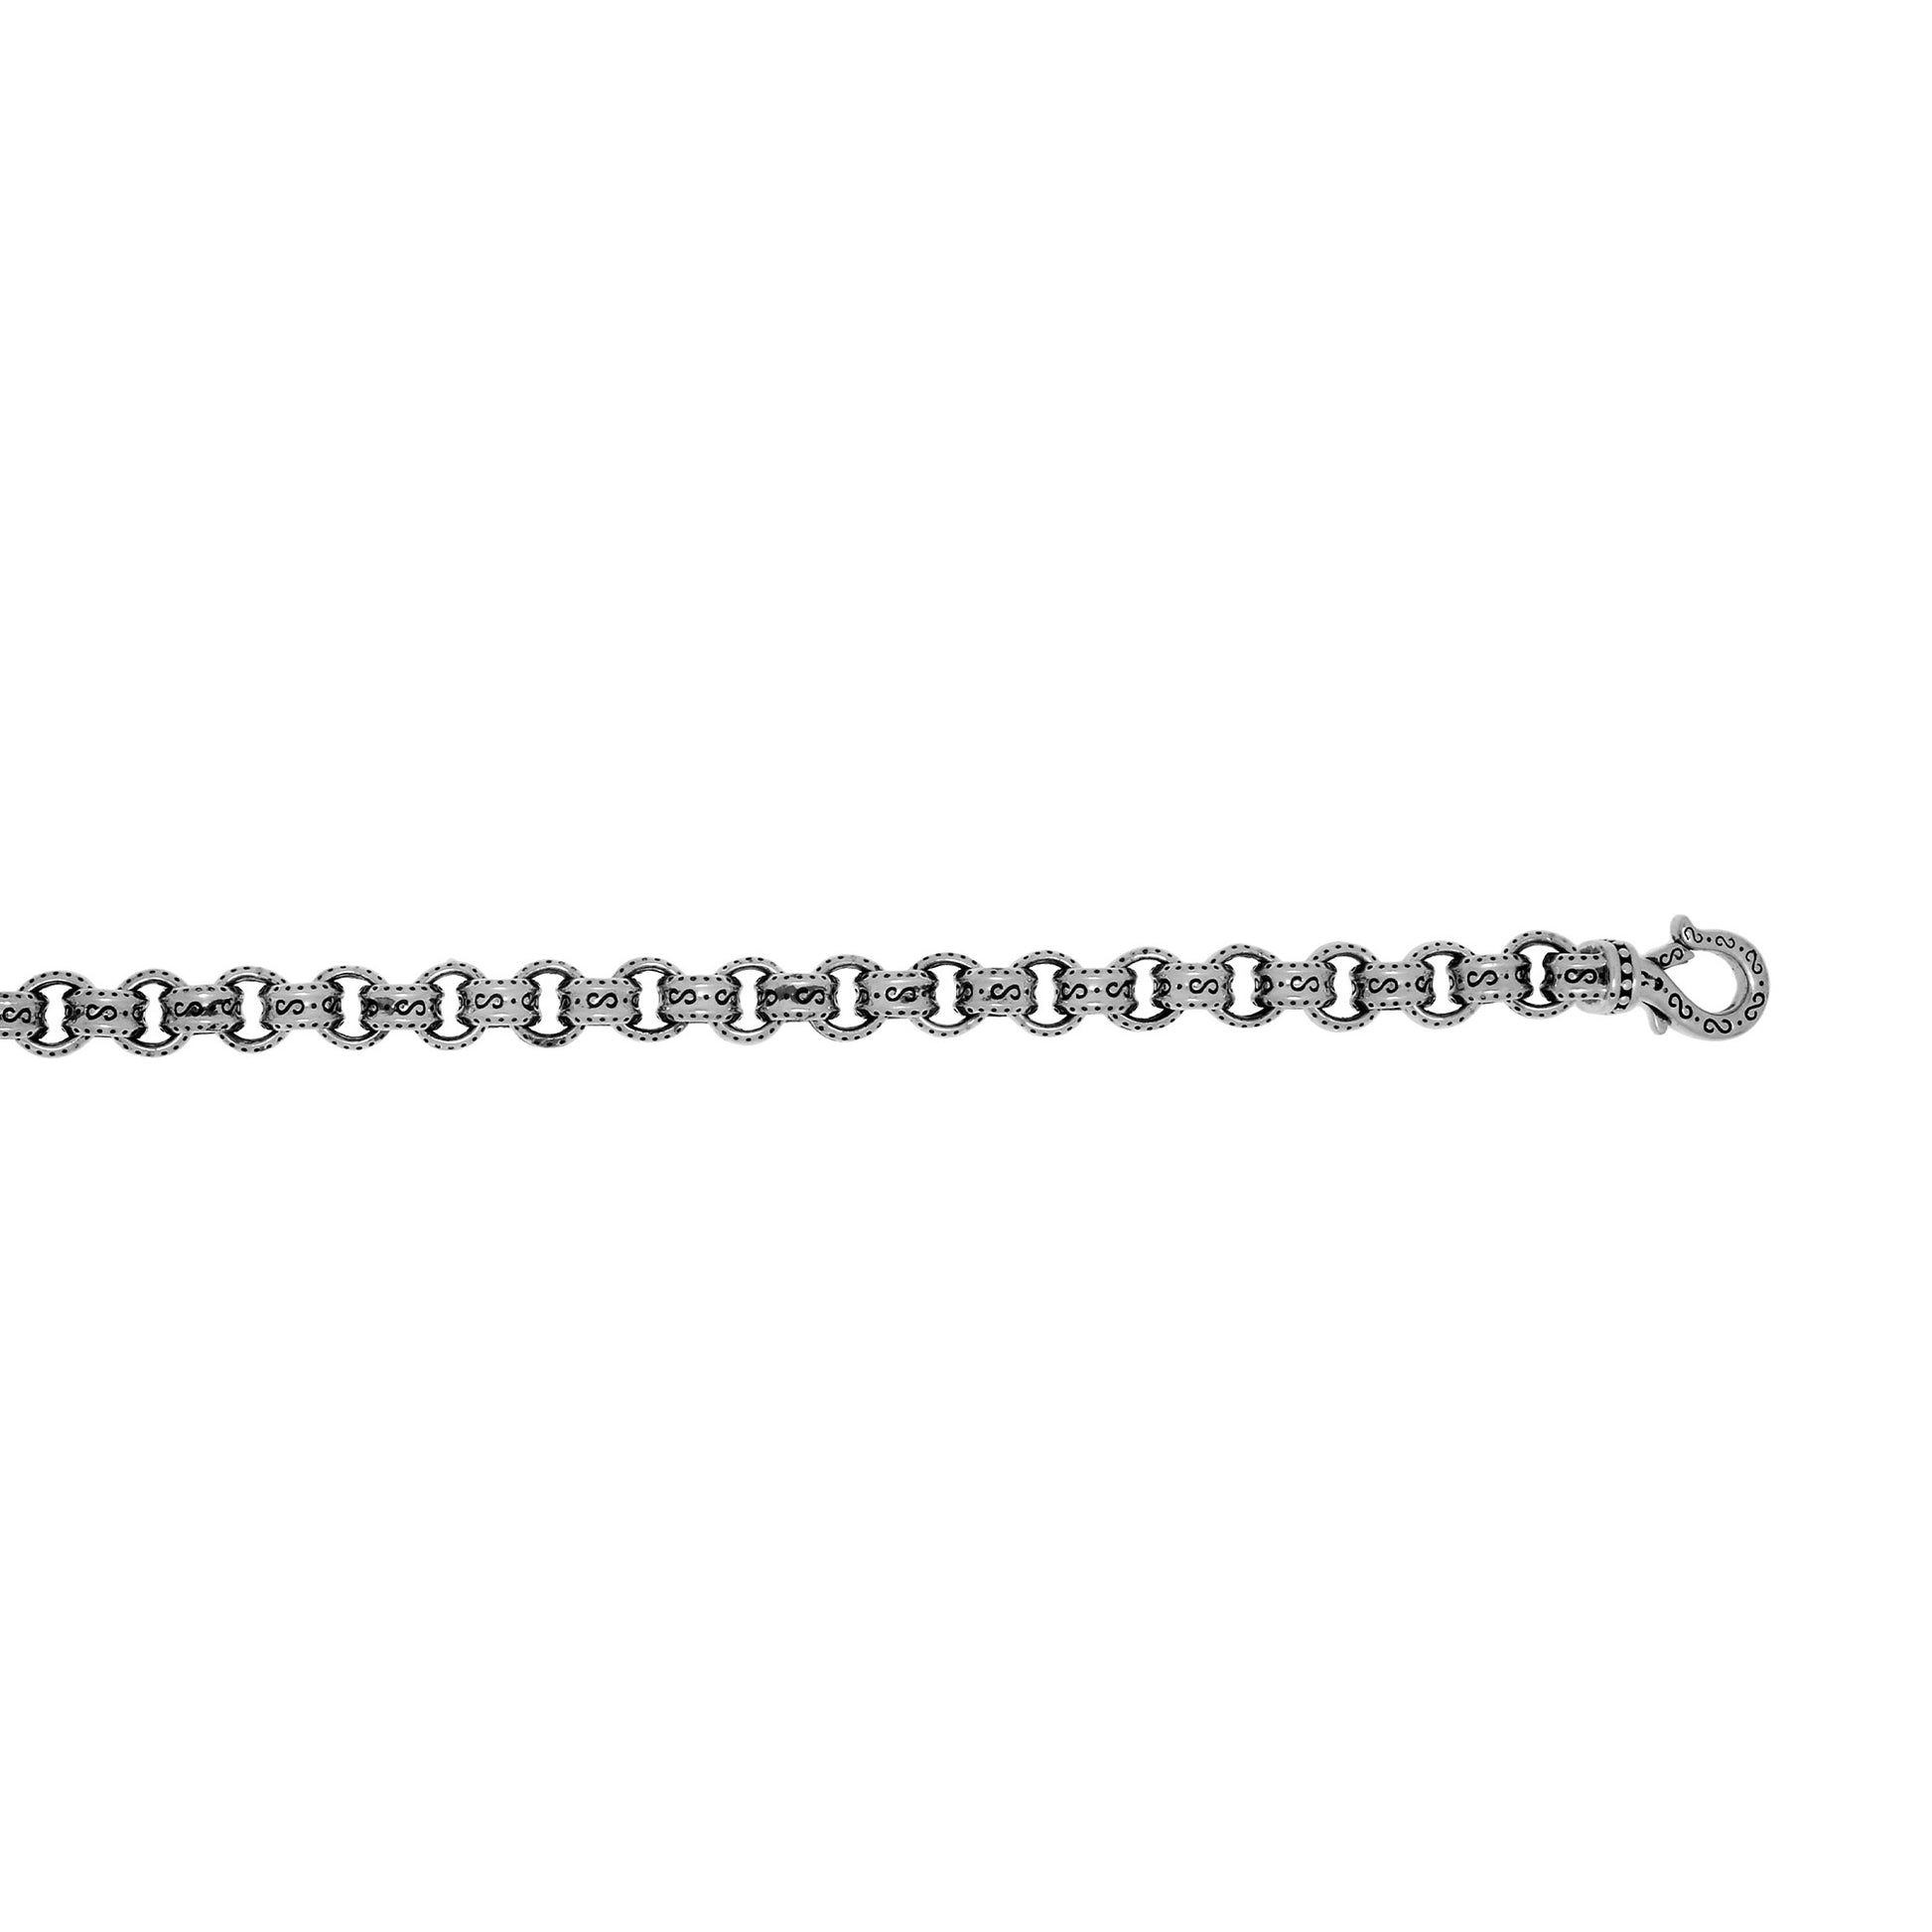 Men's 22 Inch Sterling Silver Necklace With A Rhodium And Oxidized Finish - Gents Jewelry